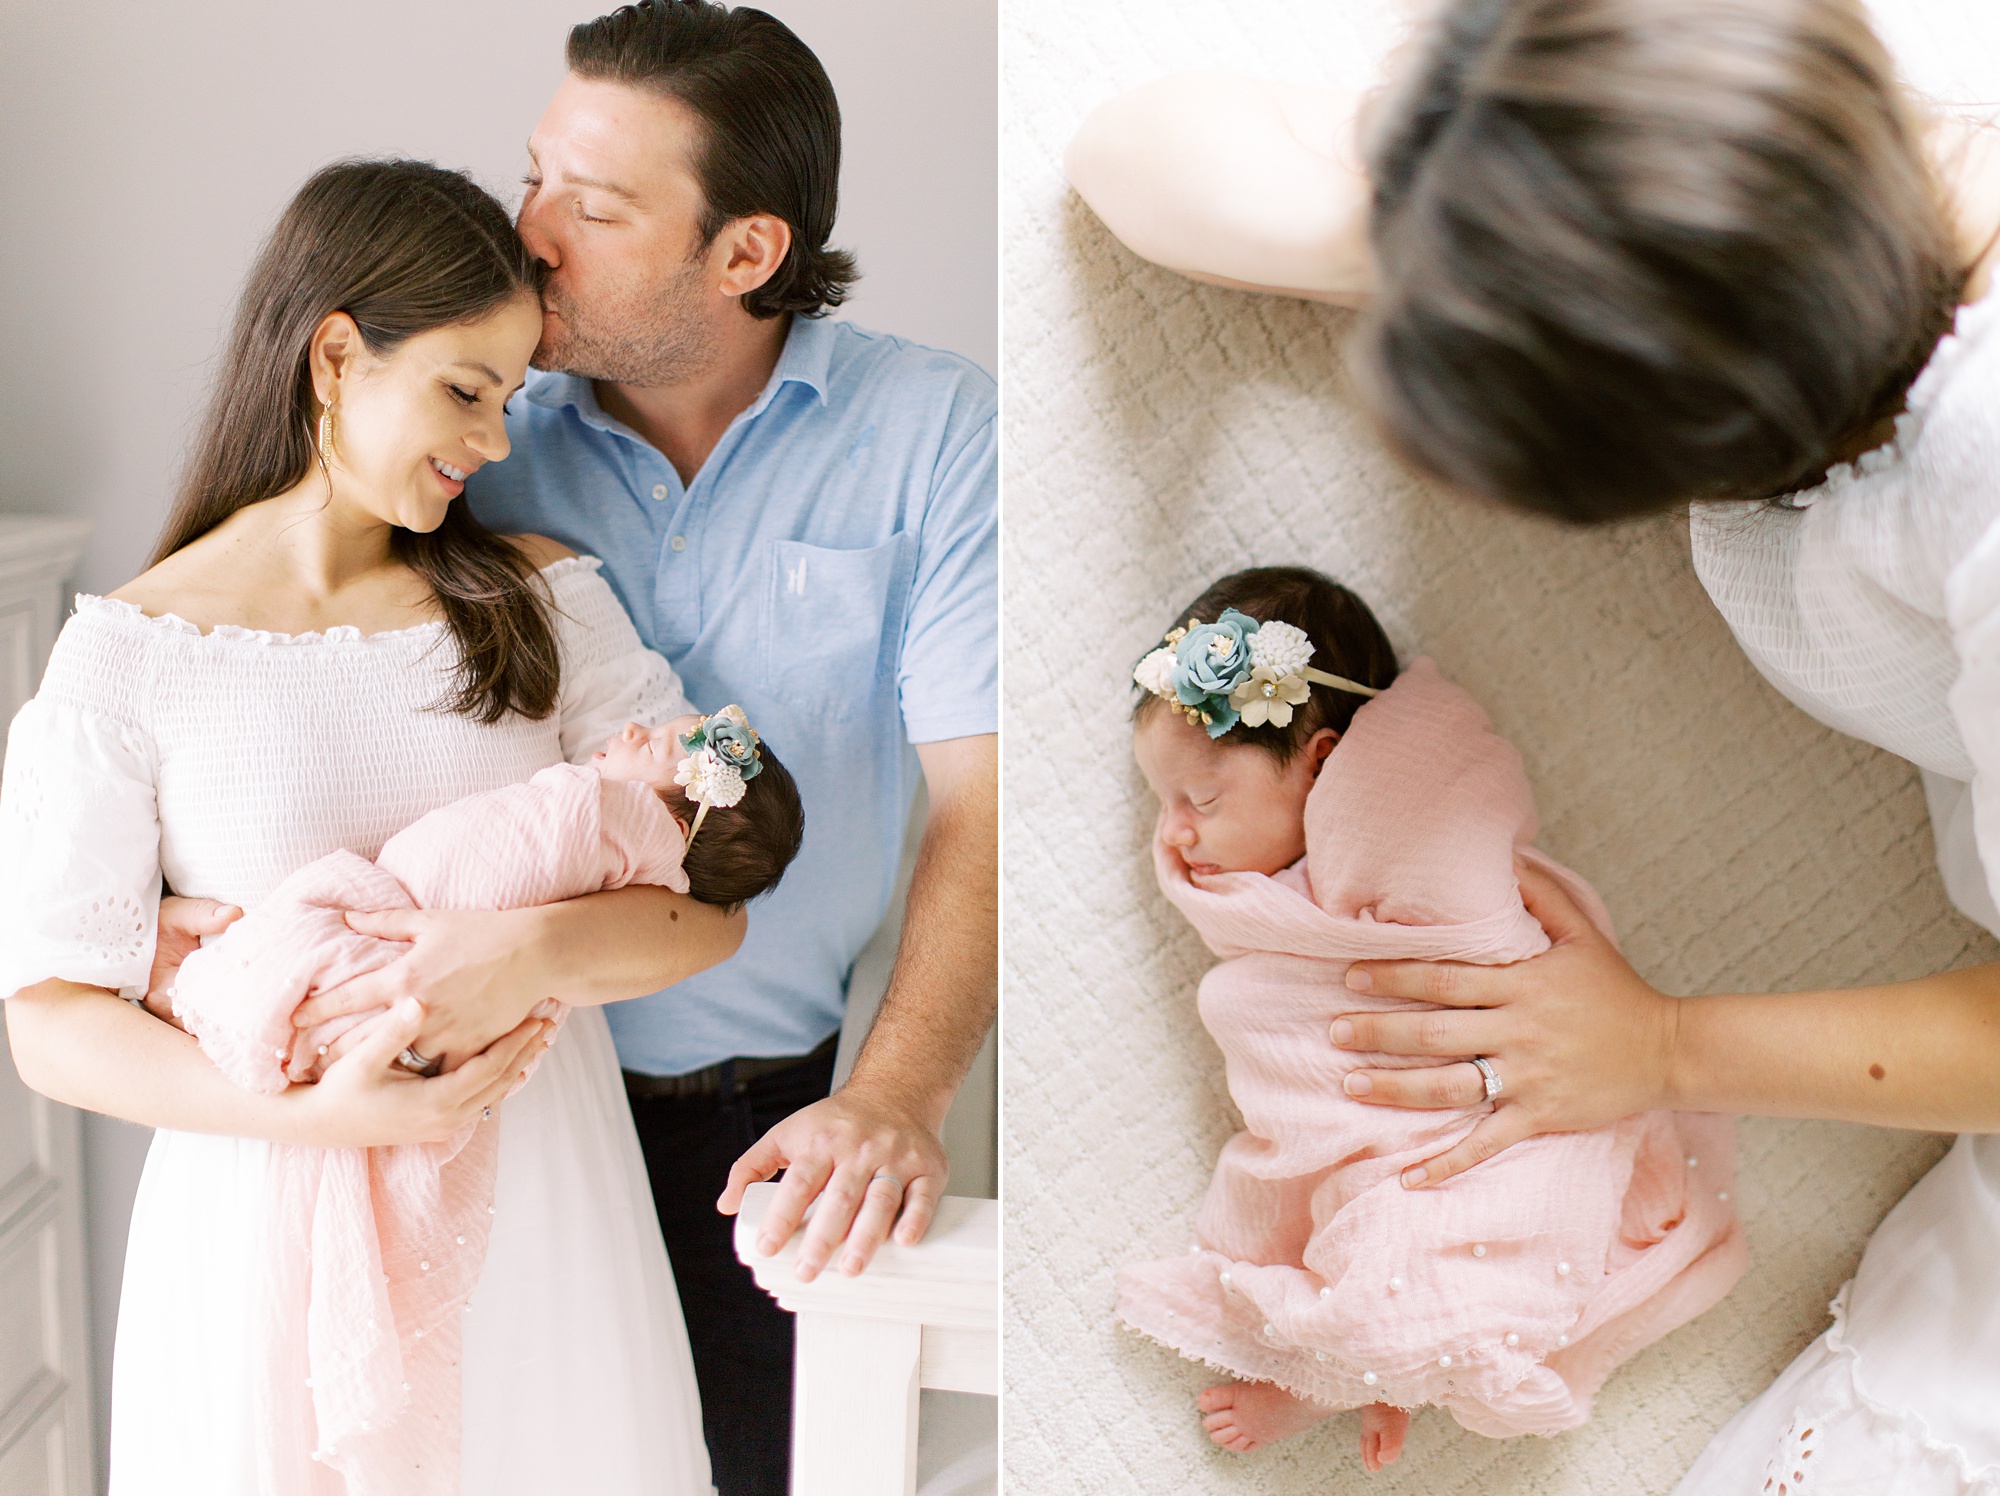 dad kisses mom's forehead during newborn photos